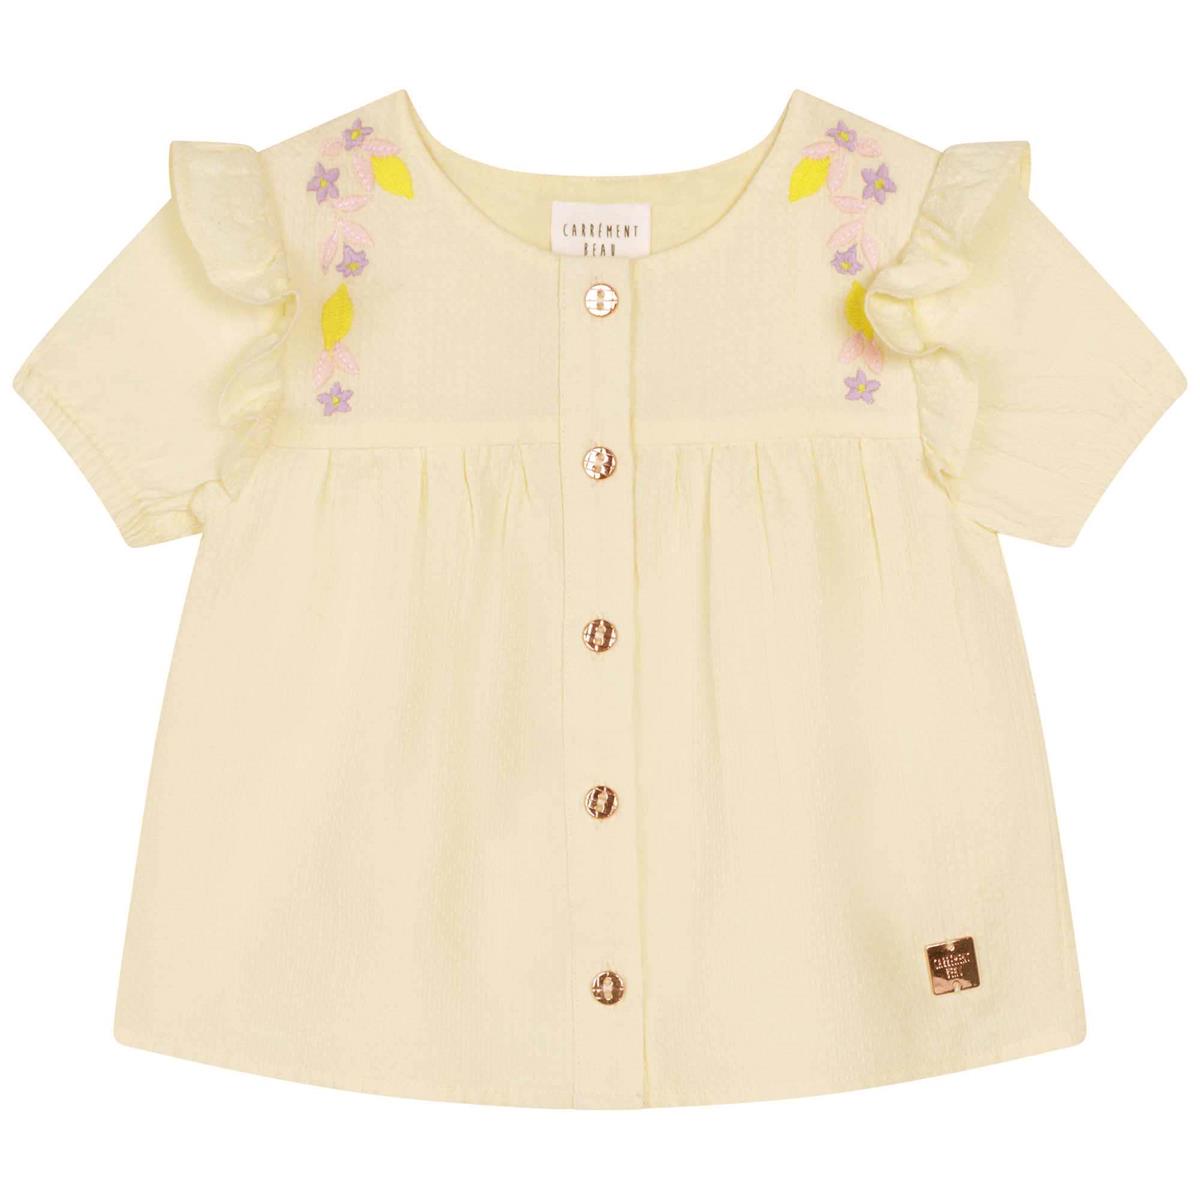 Girls Cream Embroidered Top